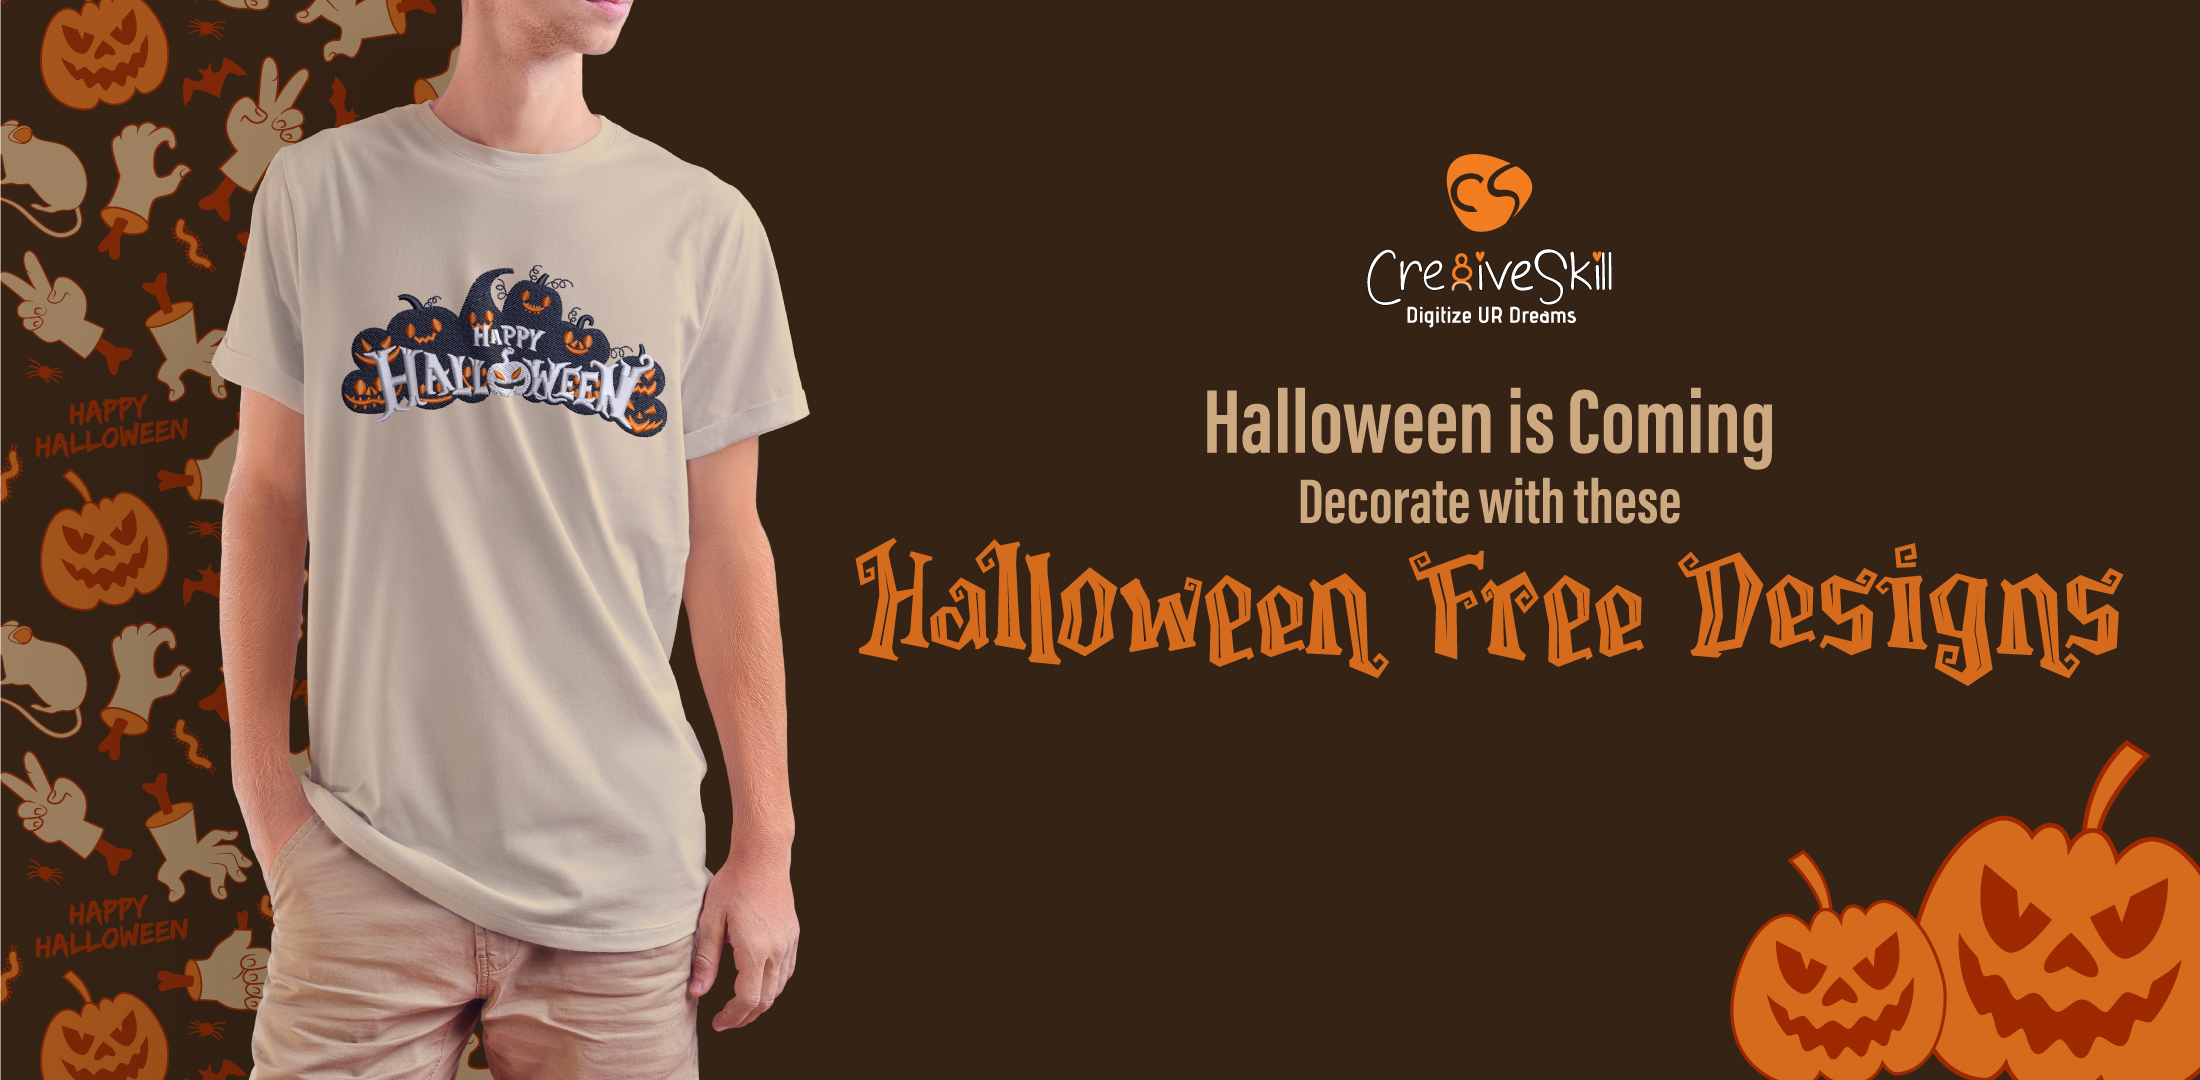 Halloween is Coming! Decorate with these Halloween Free Designs!